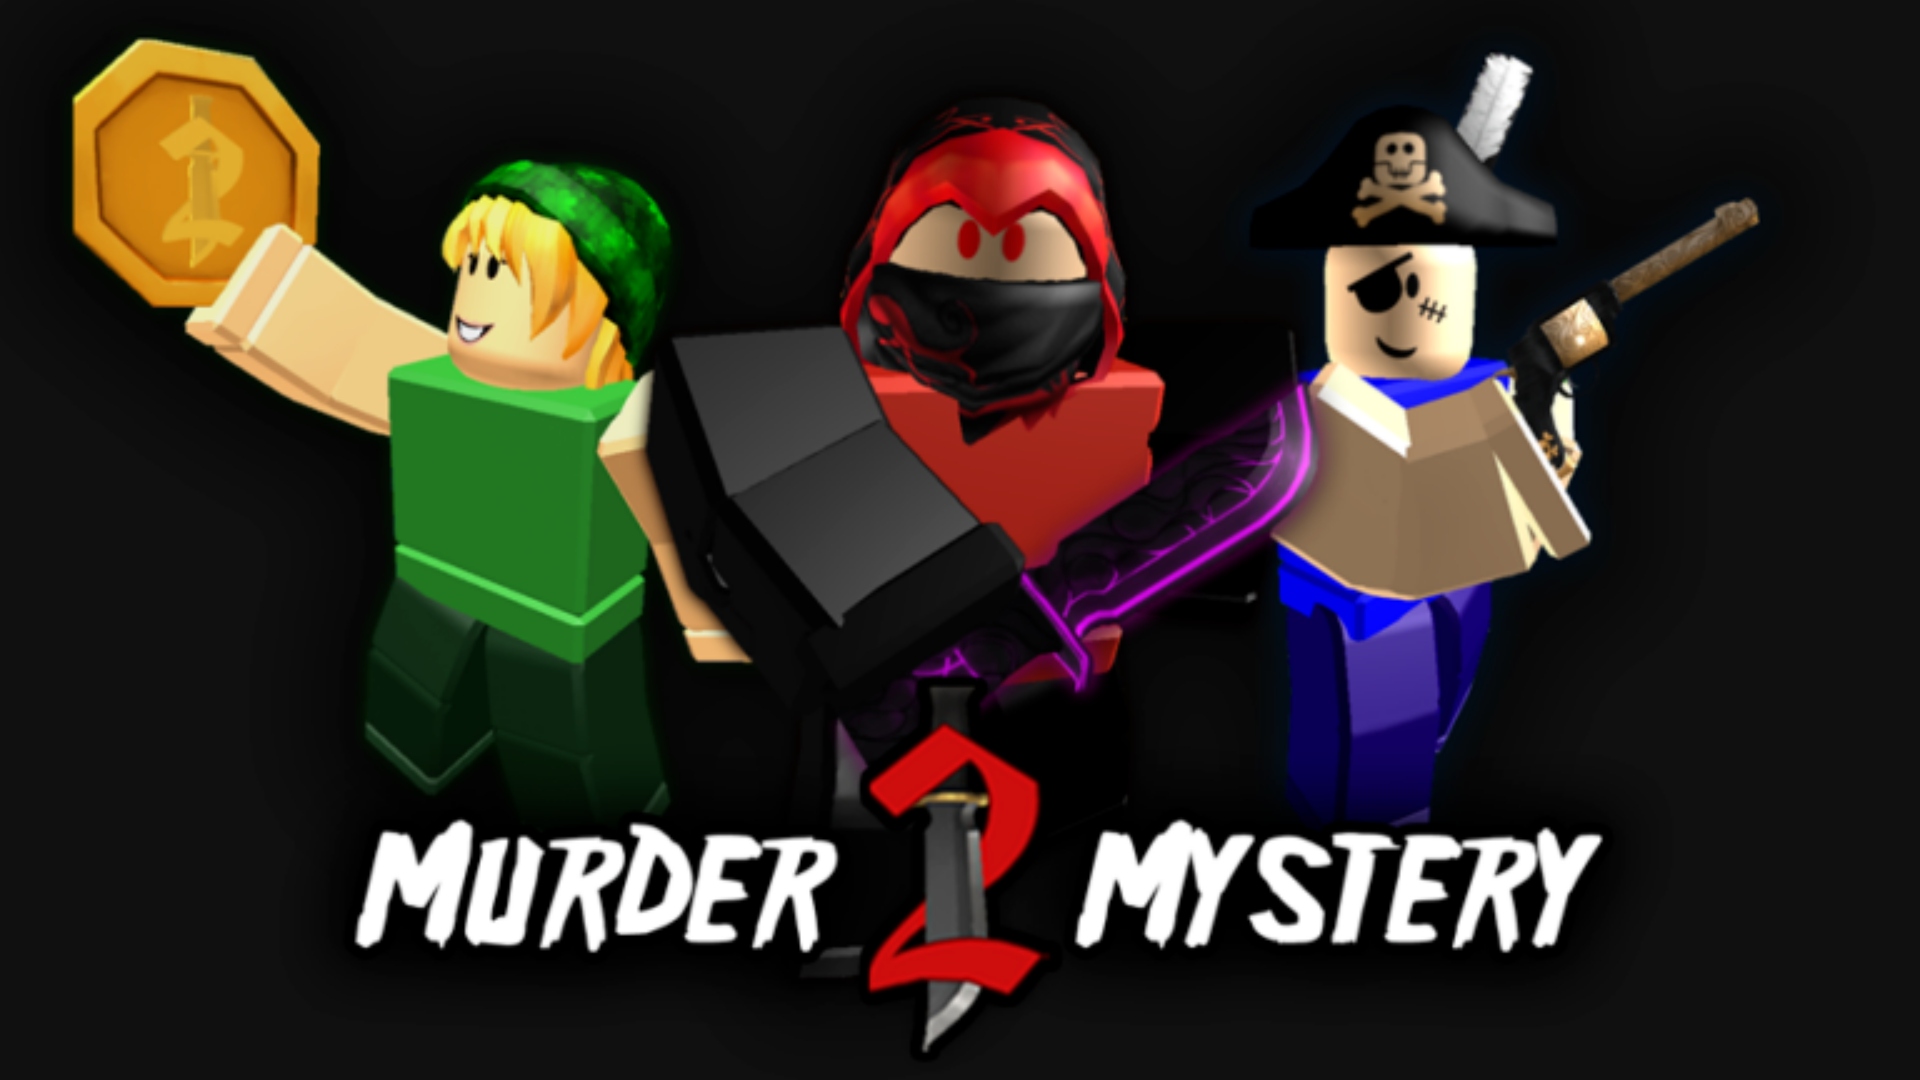 2022 CODES* ALL NEW MURDER MYSTERY 2 CODES JANUARY 2022